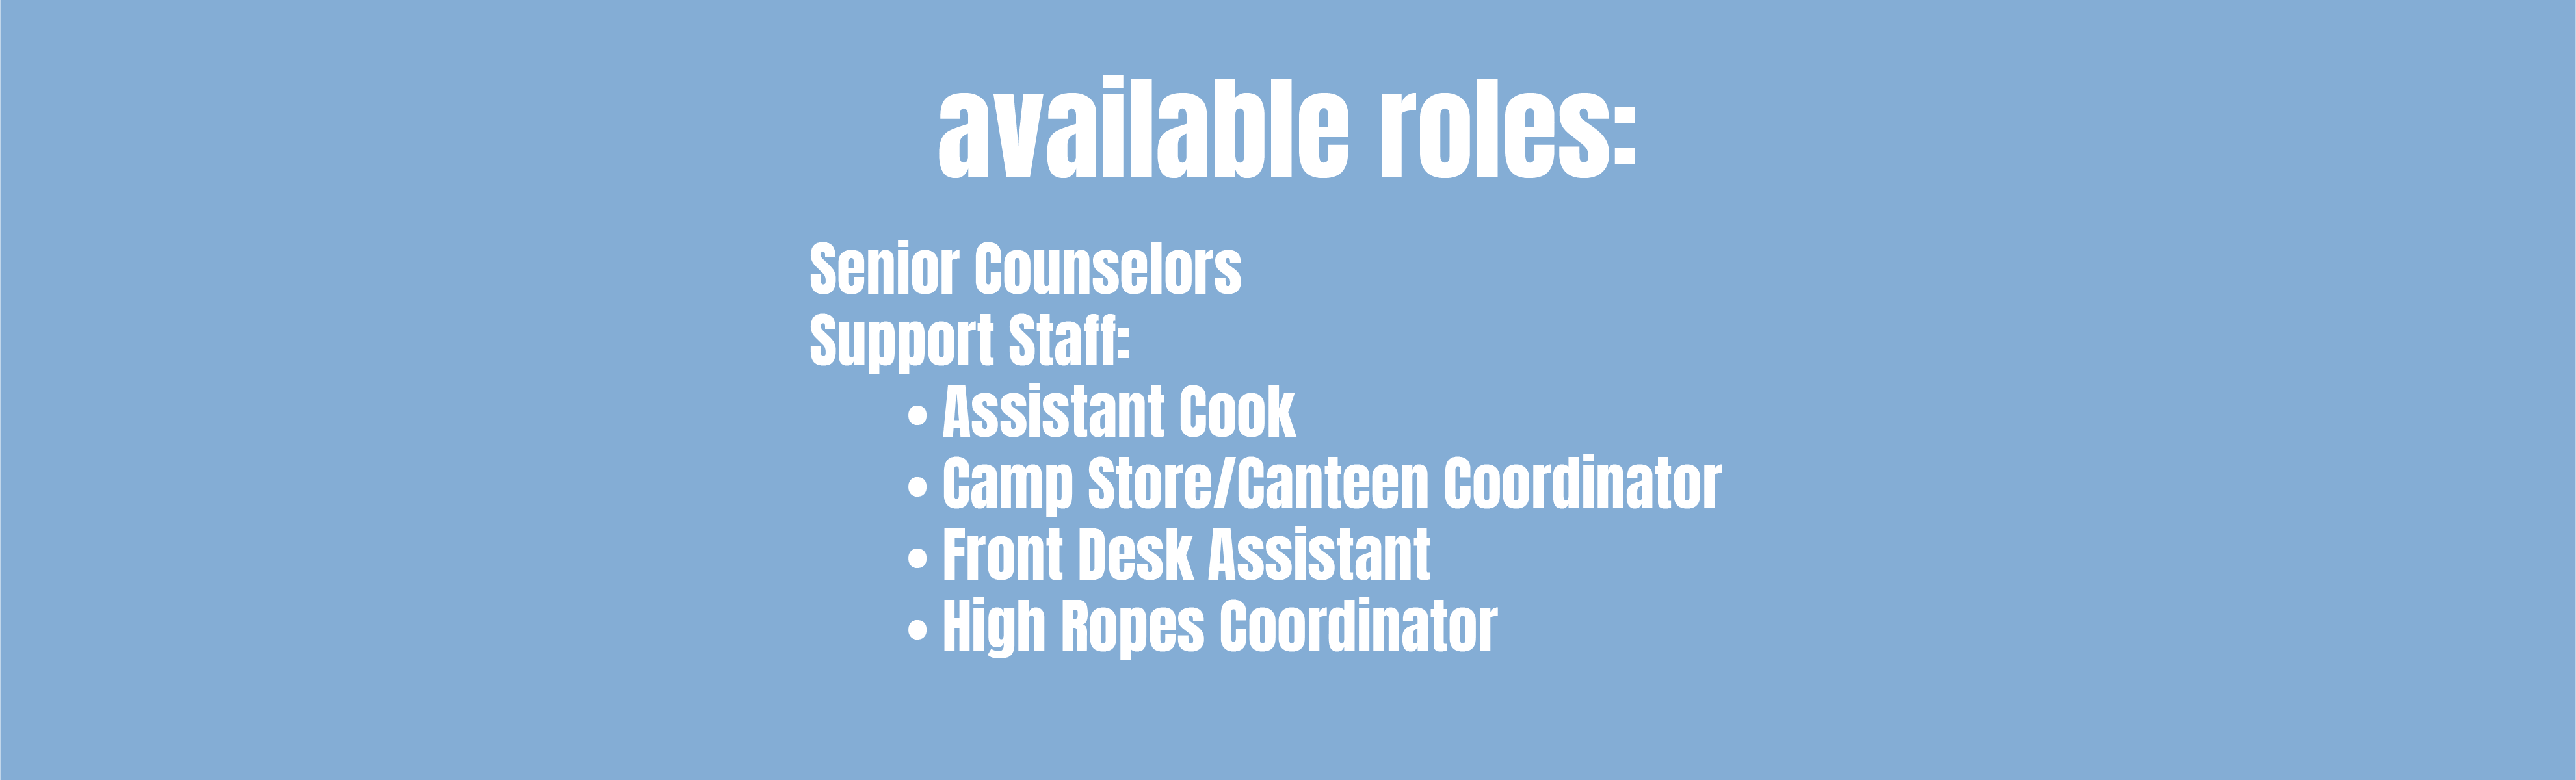 Available Roles: Senior Counselors; Support Staff: Assistant COok, Camp Store/Canteen Coordinator, Front Desk Assistant, High Ropes Coordinator